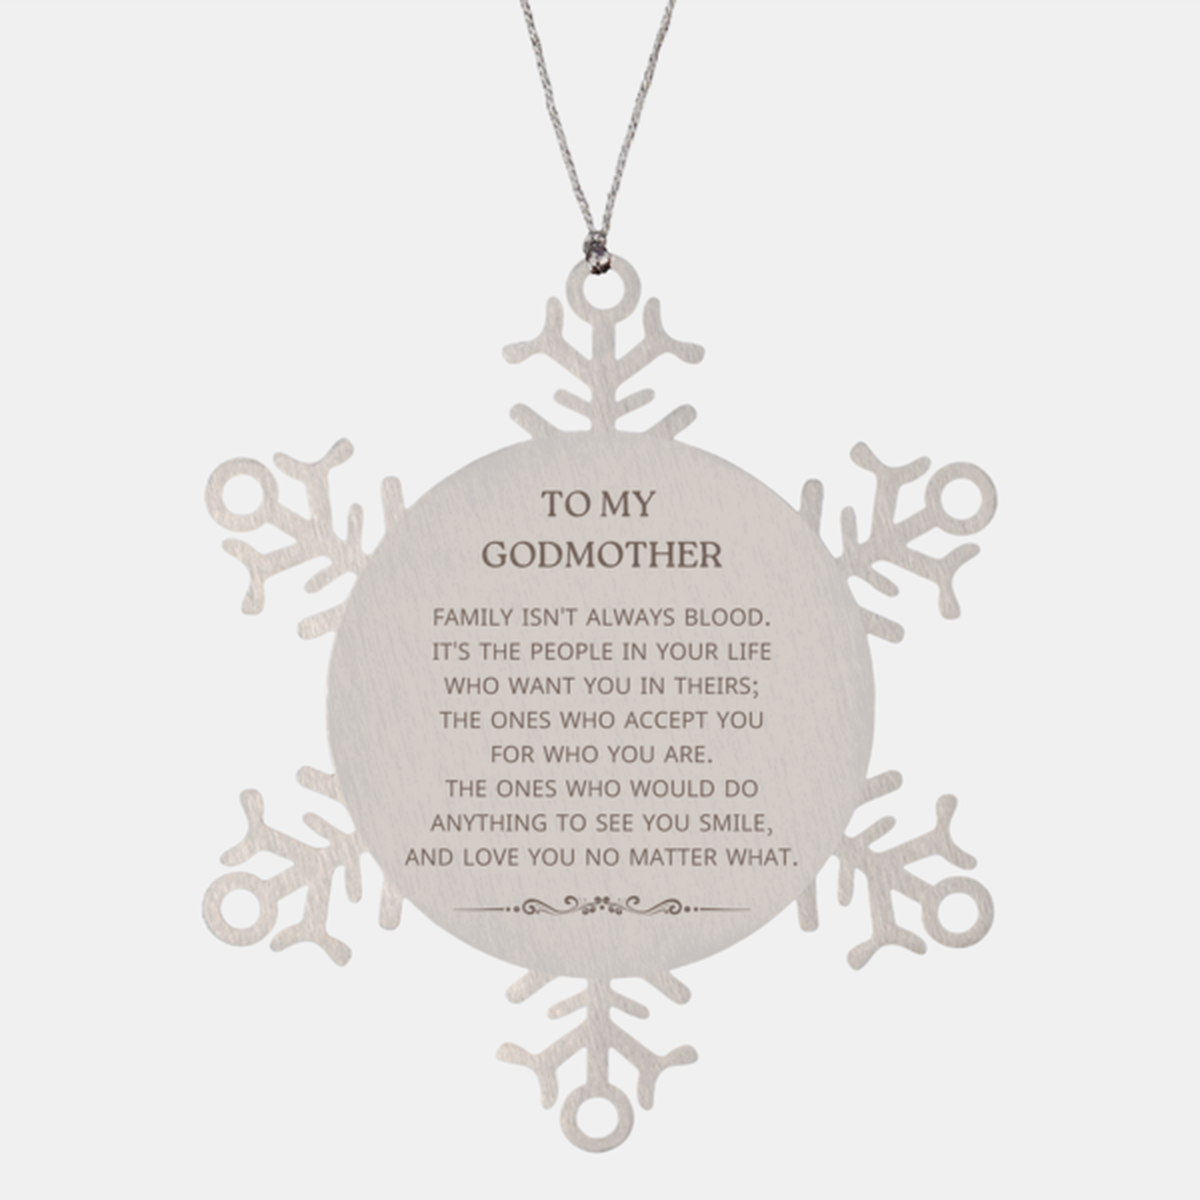 To My Godmother Gifts, Family isn't always blood, Godmother Snowflake Ornament, Birthday Christmas Unique Present For Godmother